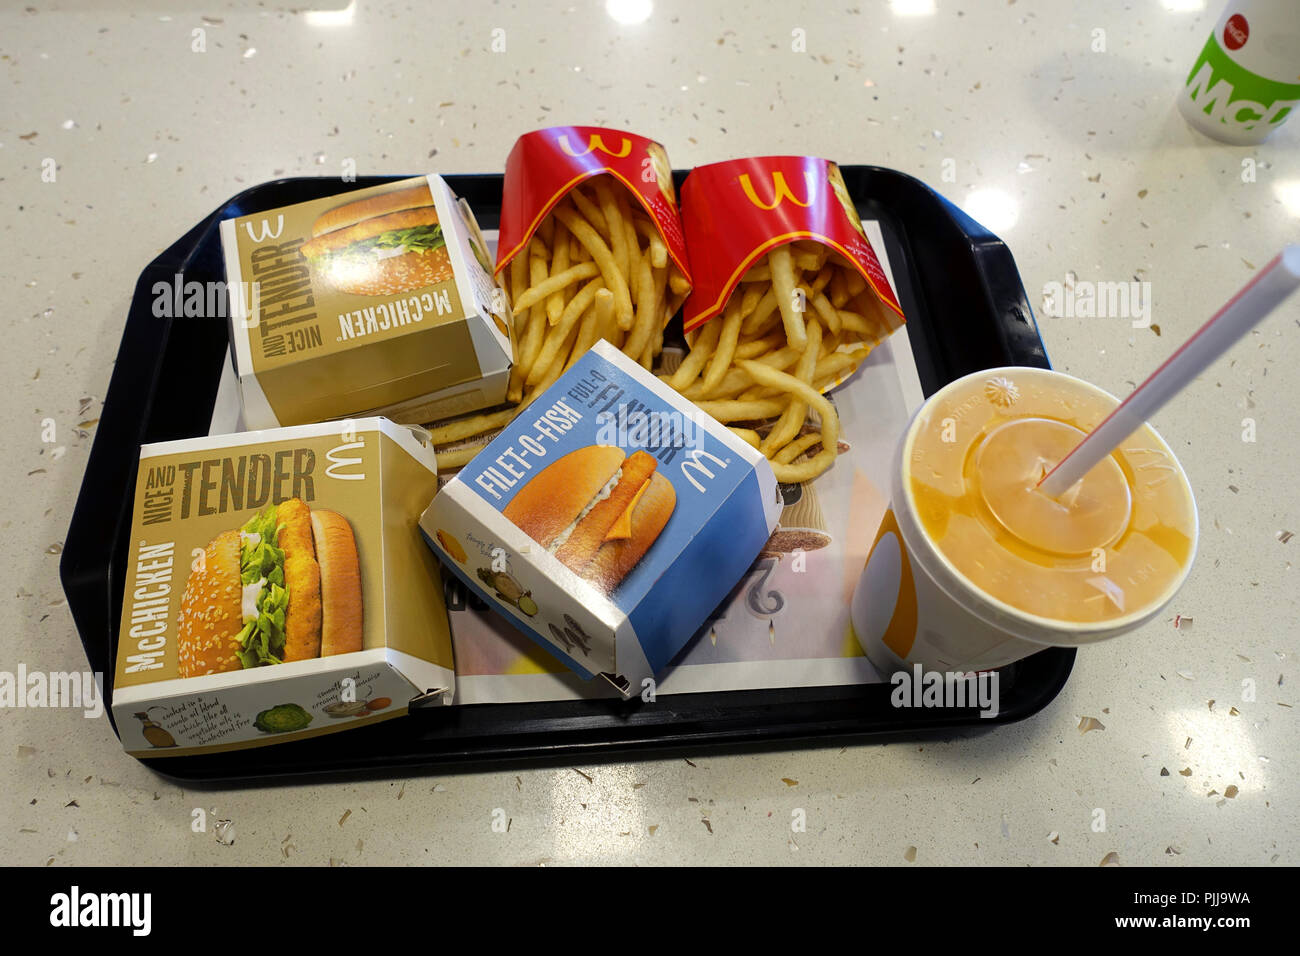 Australian McDonald's burgers, fries and a drink on a tray Stock Photo